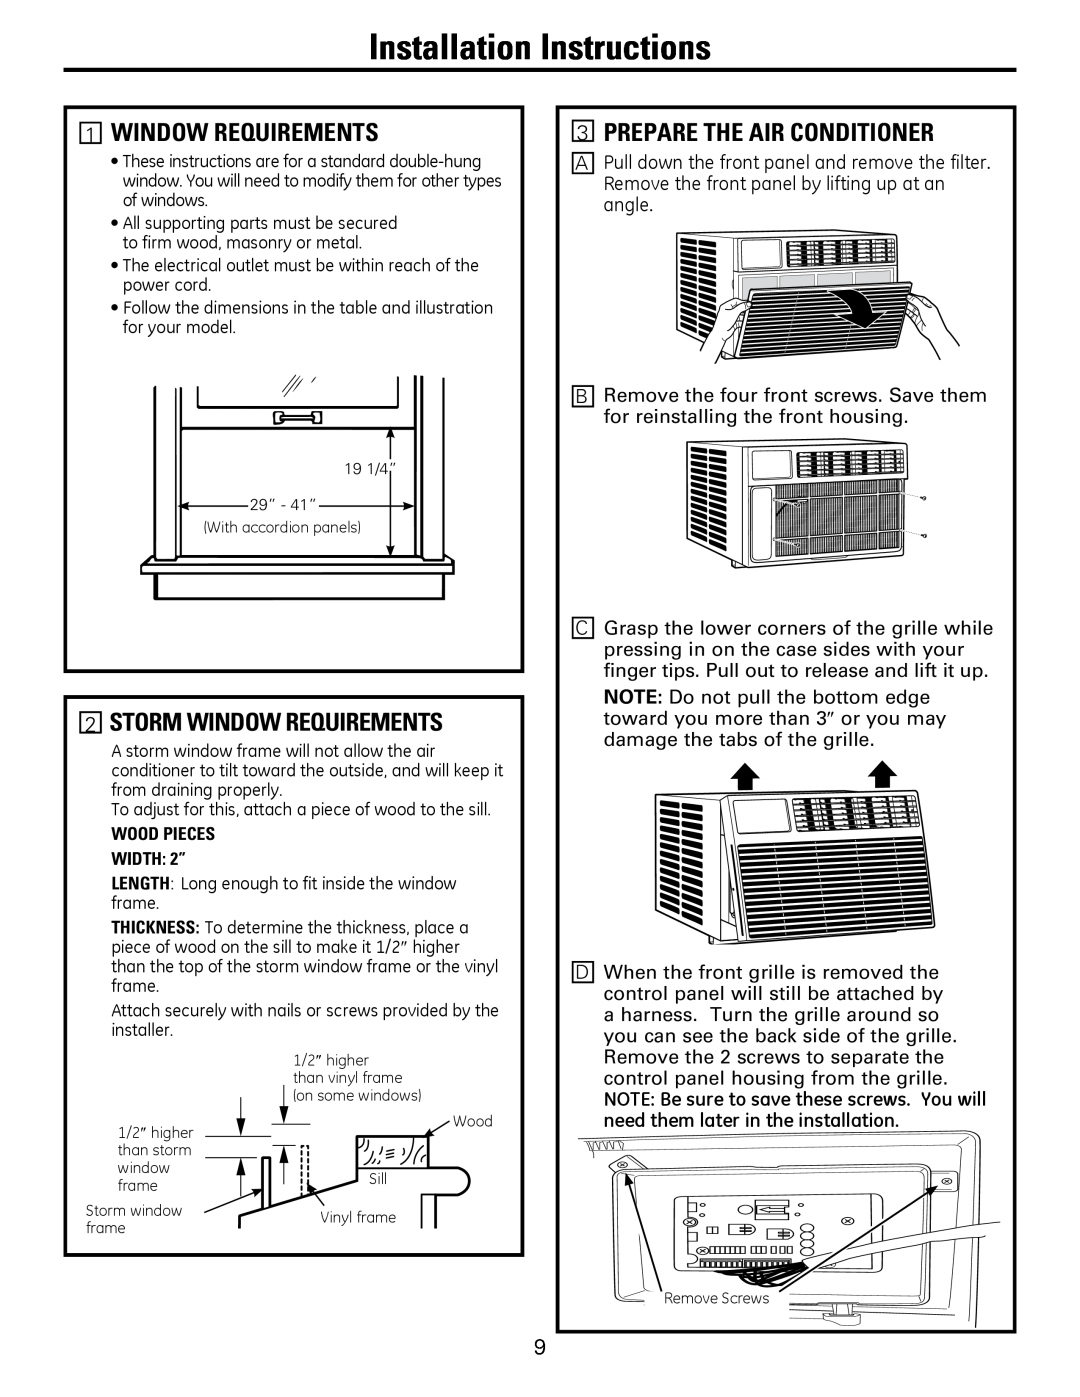 GE AEM25, AEQ25 operating instructions PREPARE THE AiR CONDiTiONER, STORM WiNDOW REQuiREMENTS, installation instructions 